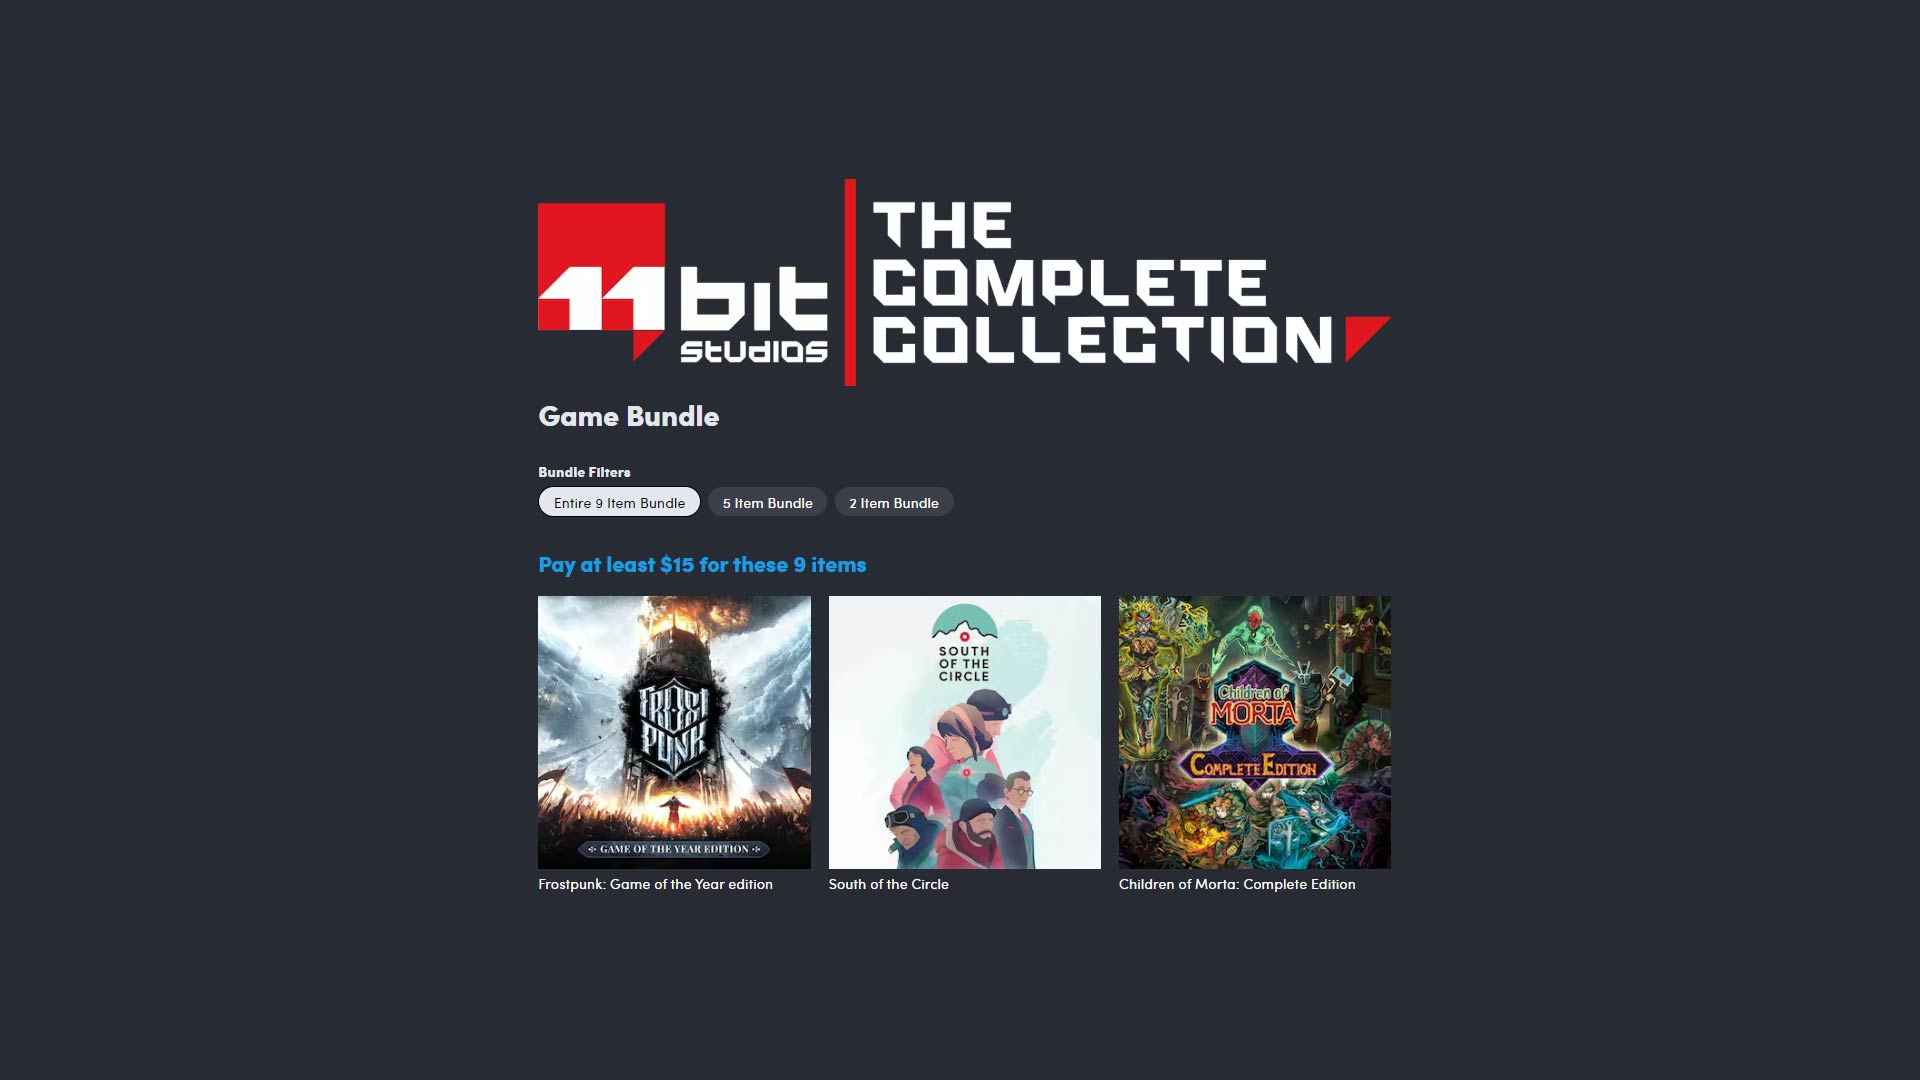 Humble Bundle 11 Bit Collection packs Frostpunk, Moonlighter, Children of Morta, and more